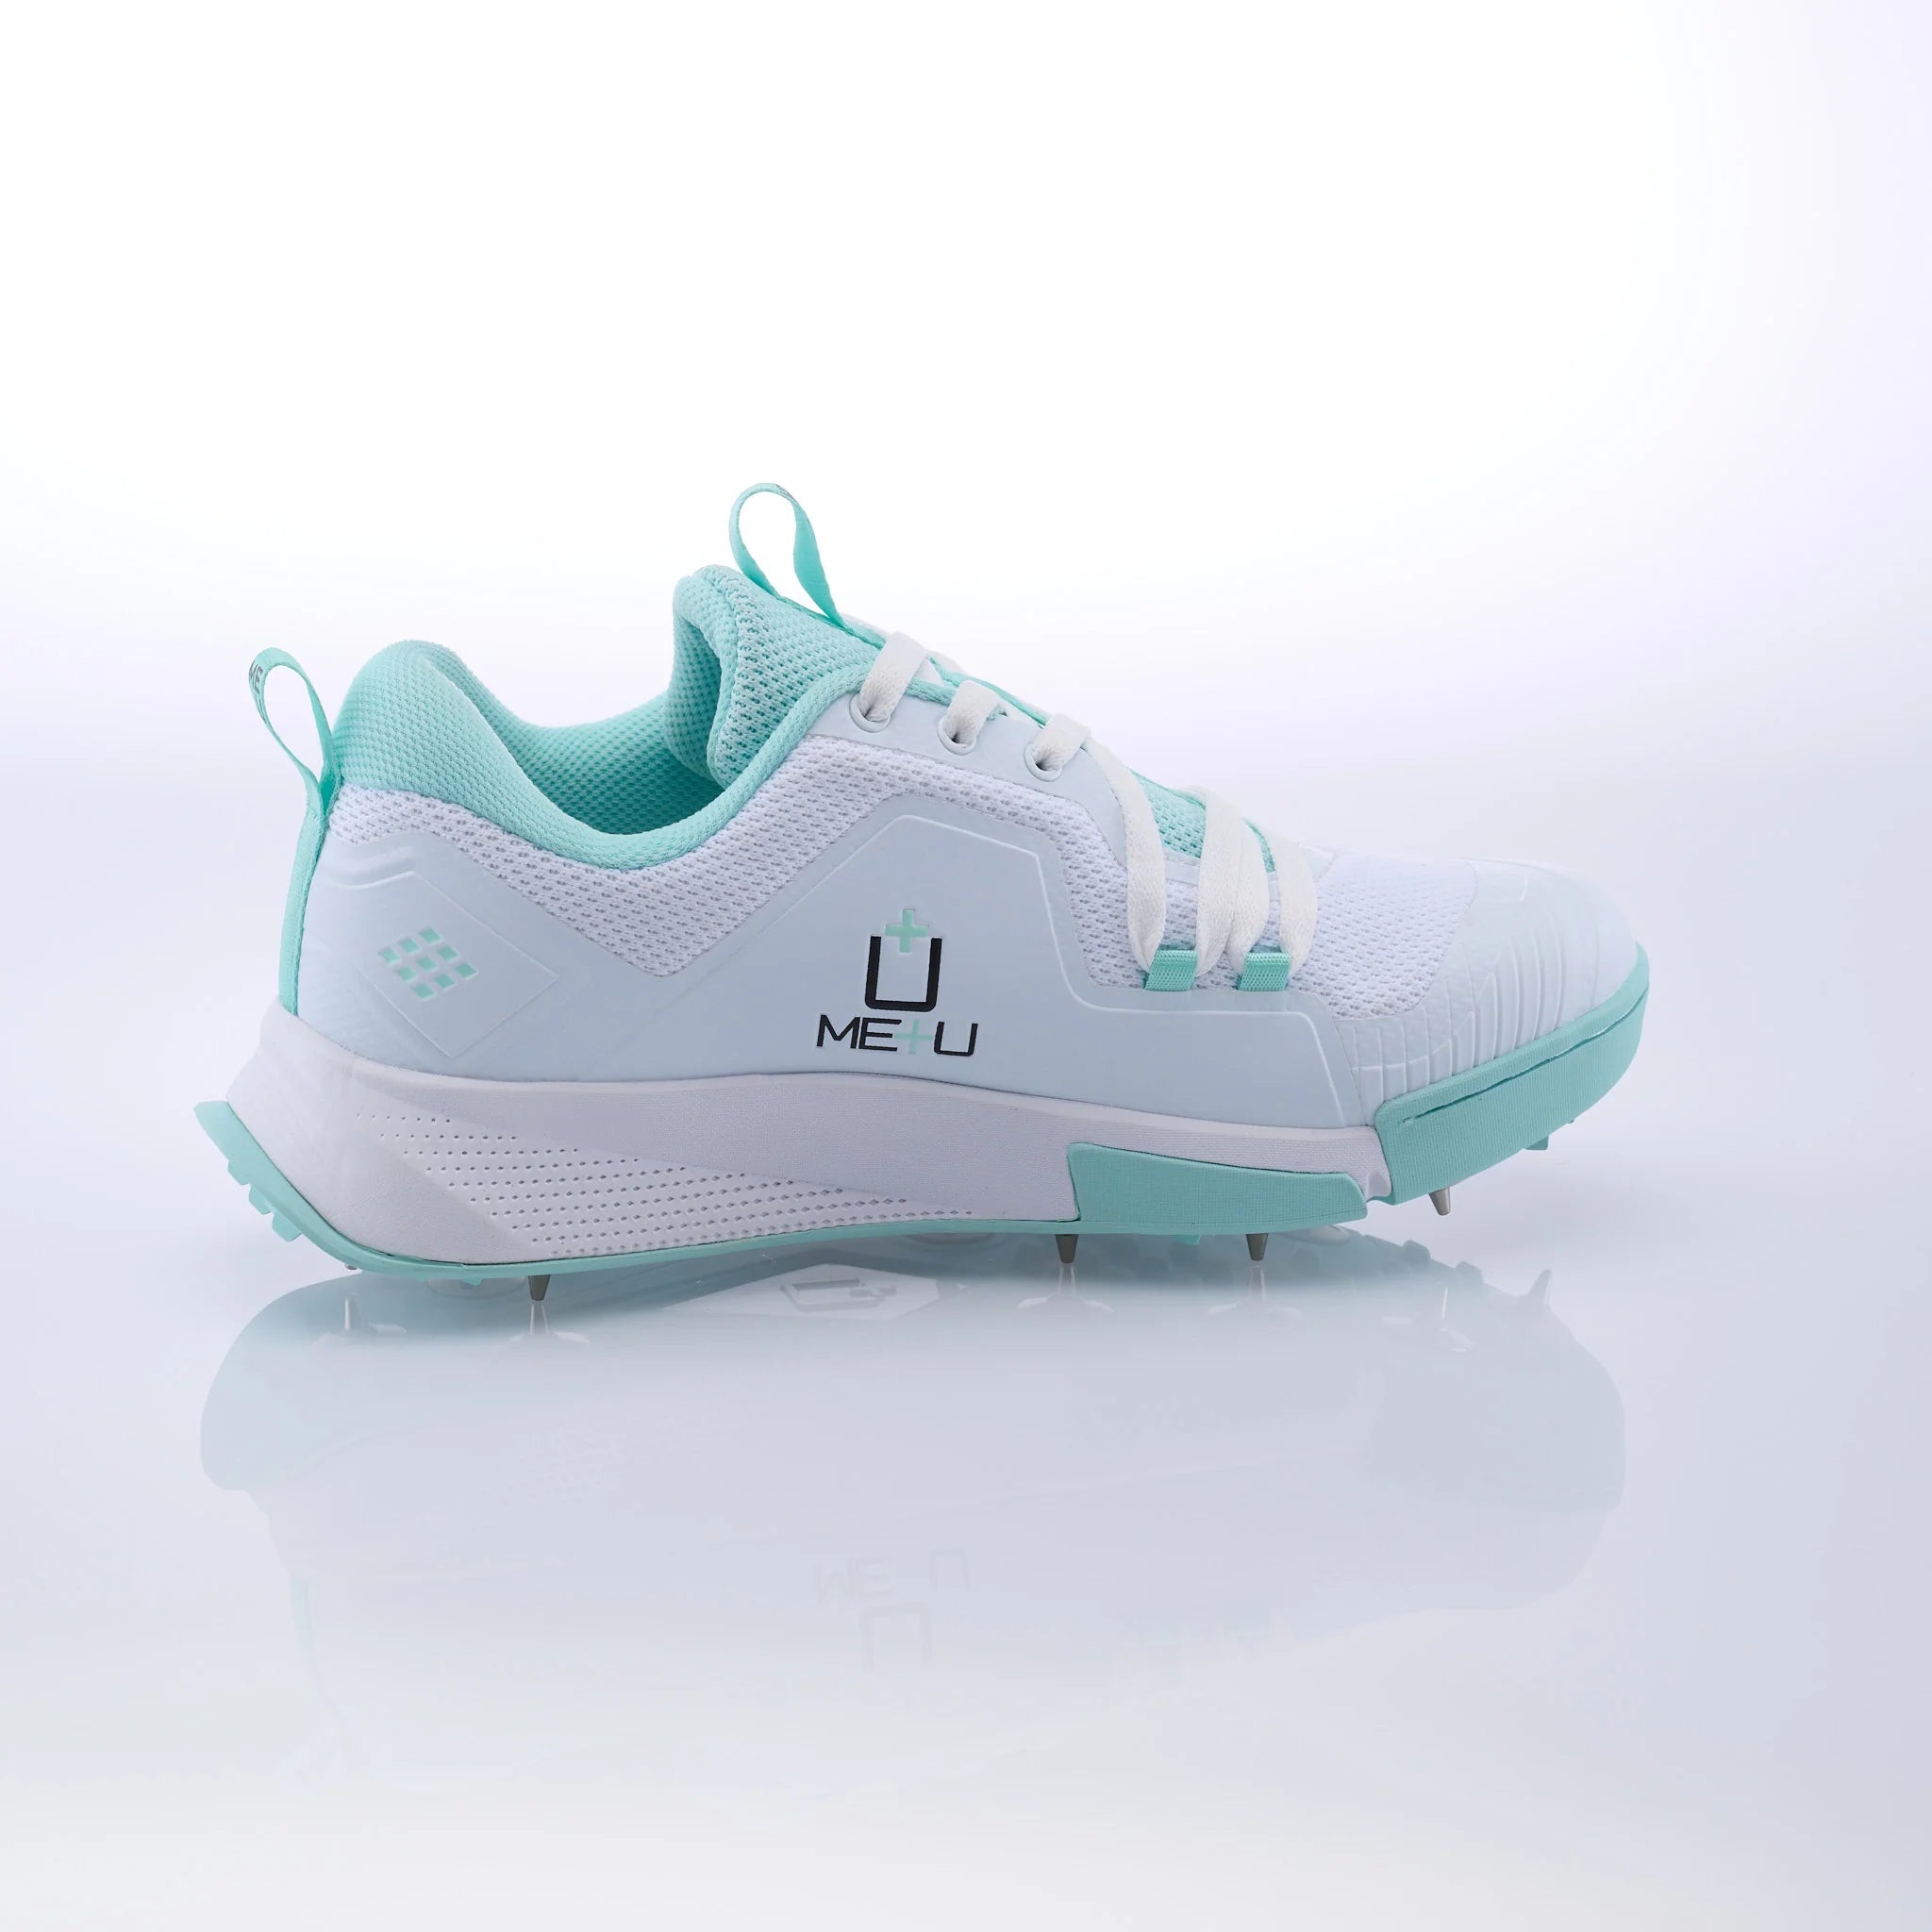 ME+U Womens All Rounder Cricket Spikes Shoe